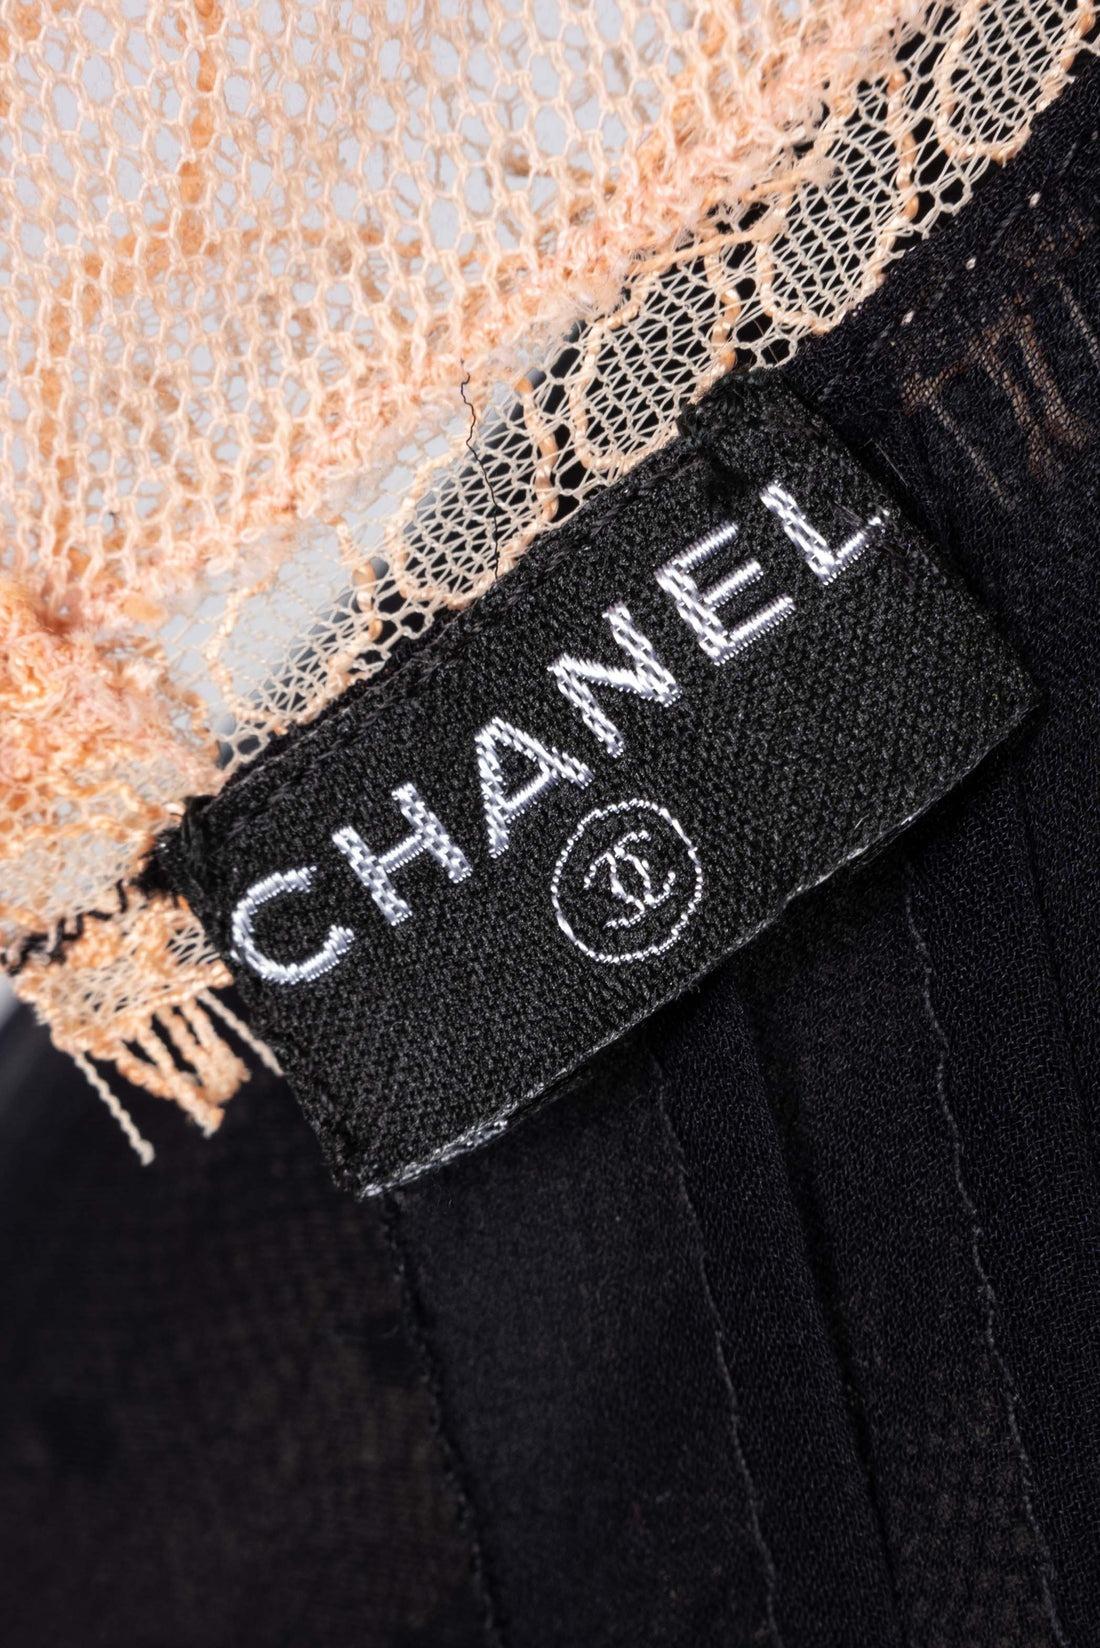 Chanel Babydoll-Style Dress in Black Silk Muslin and Beige Lace, 1990s For Sale 10